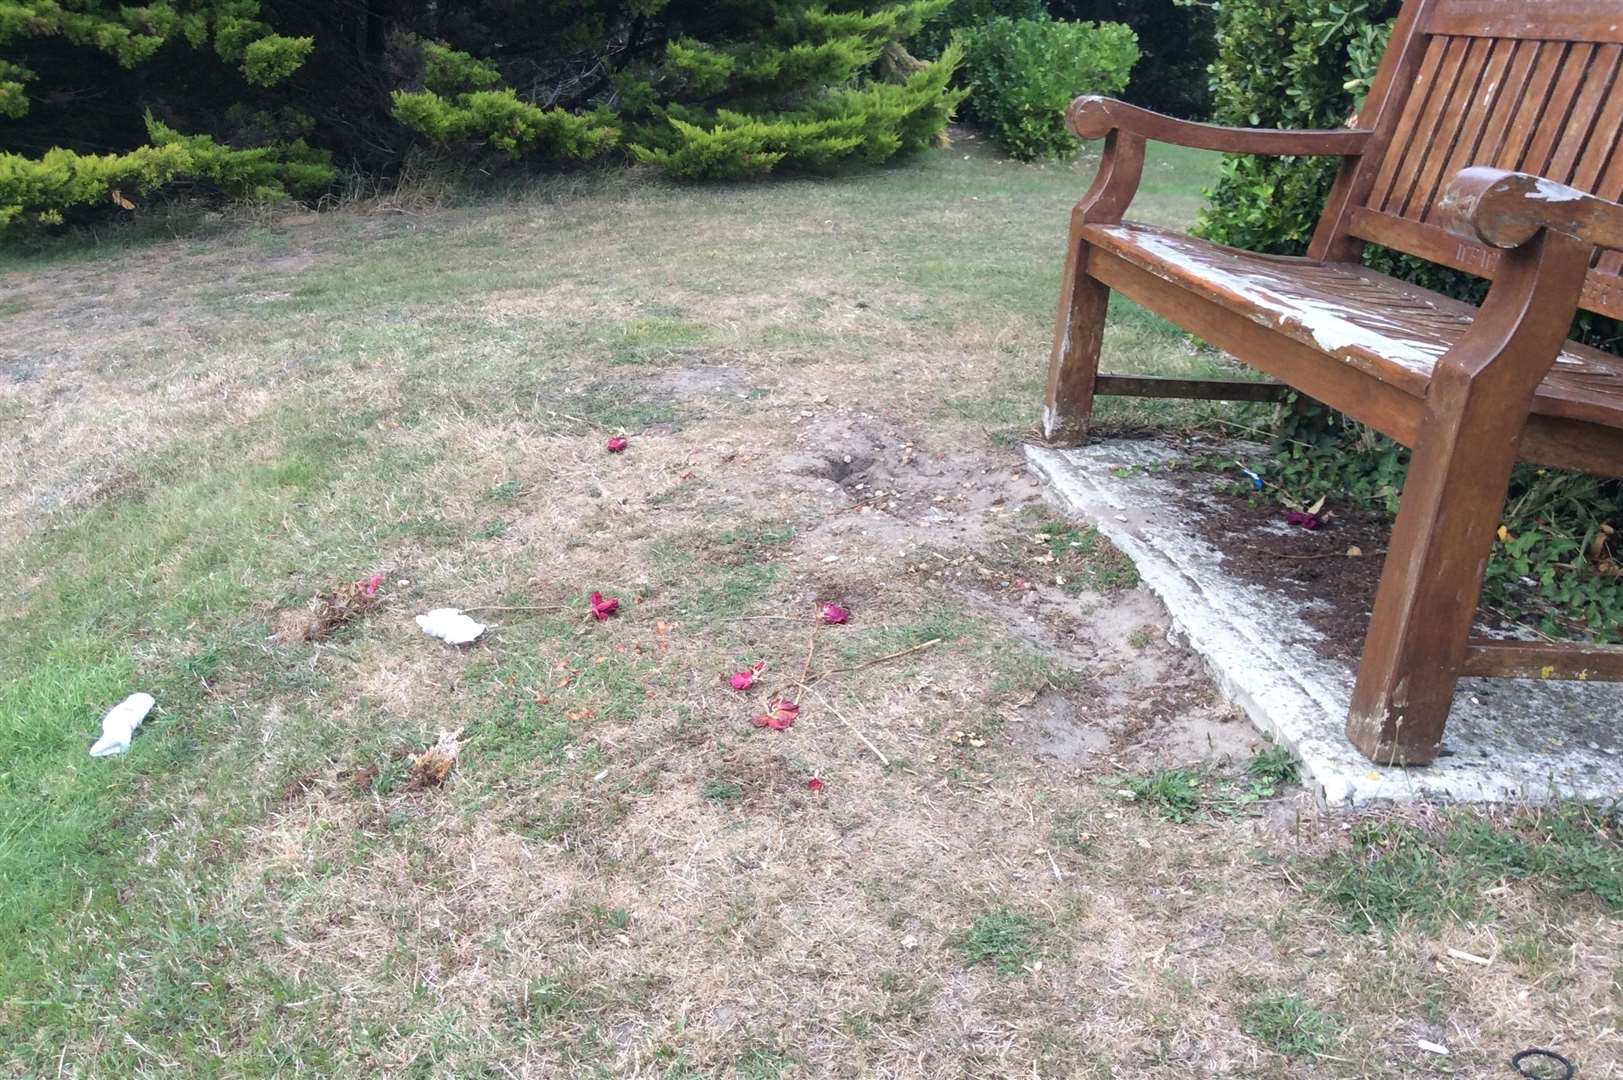 Complaints have been made following the spate of anti social behaviour at the Shorncliffe Military Cemetery